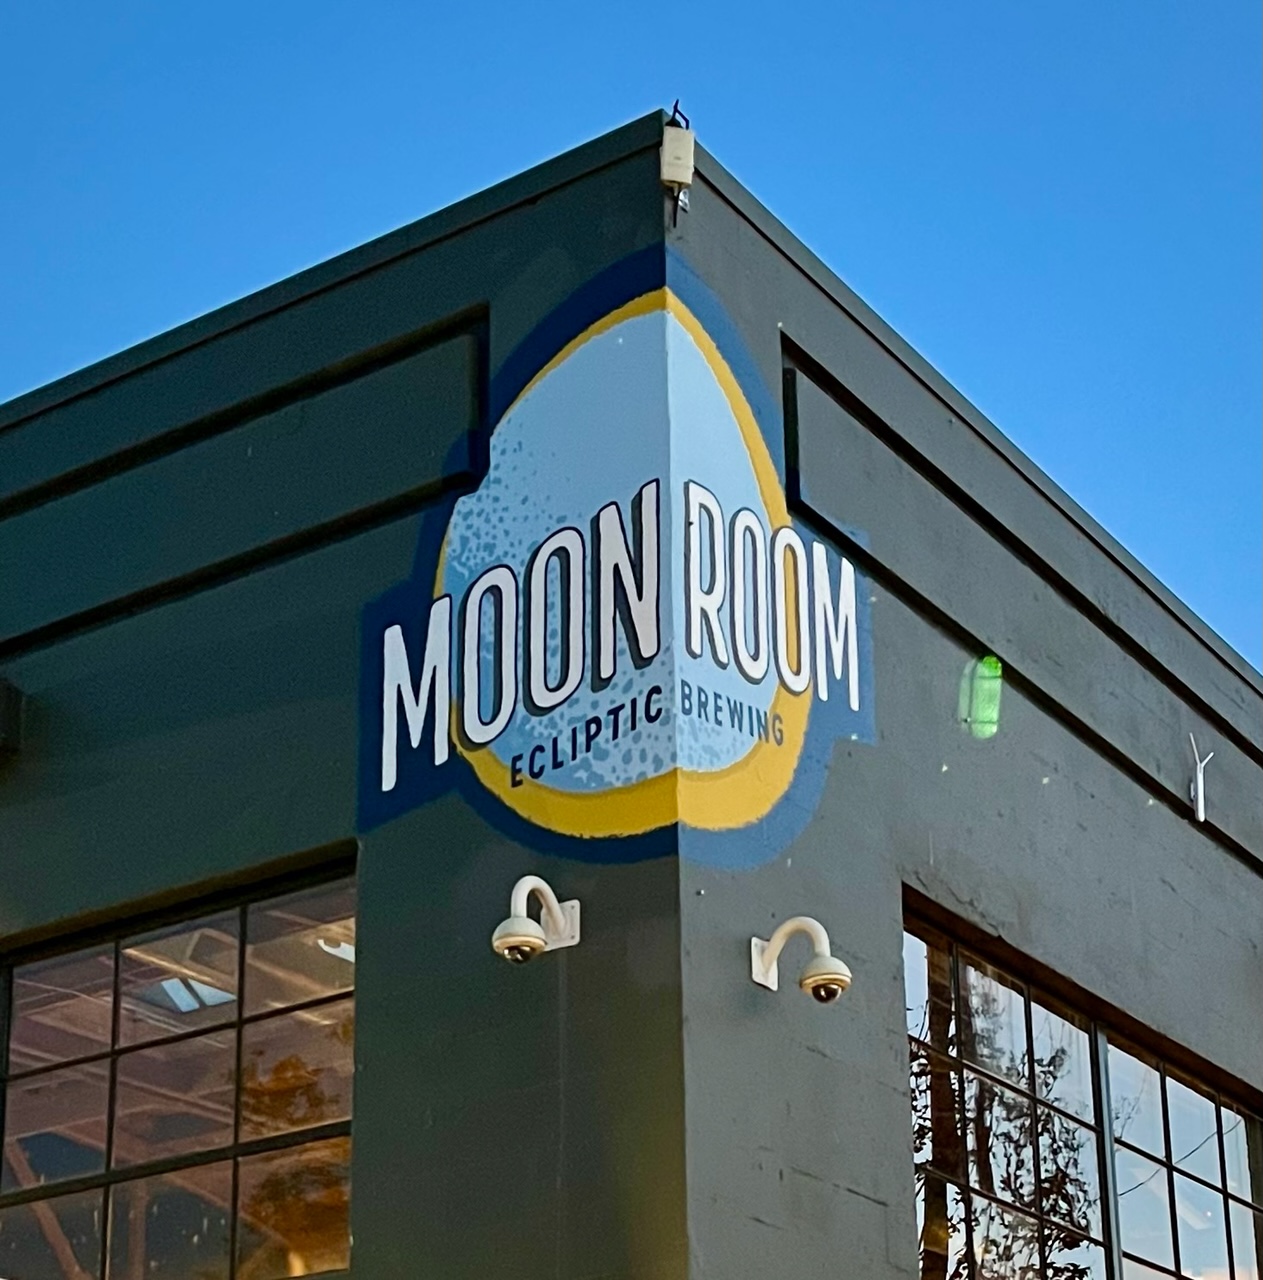 Ecliptic Brewing's new Moon Room locate in Southeast Portland.